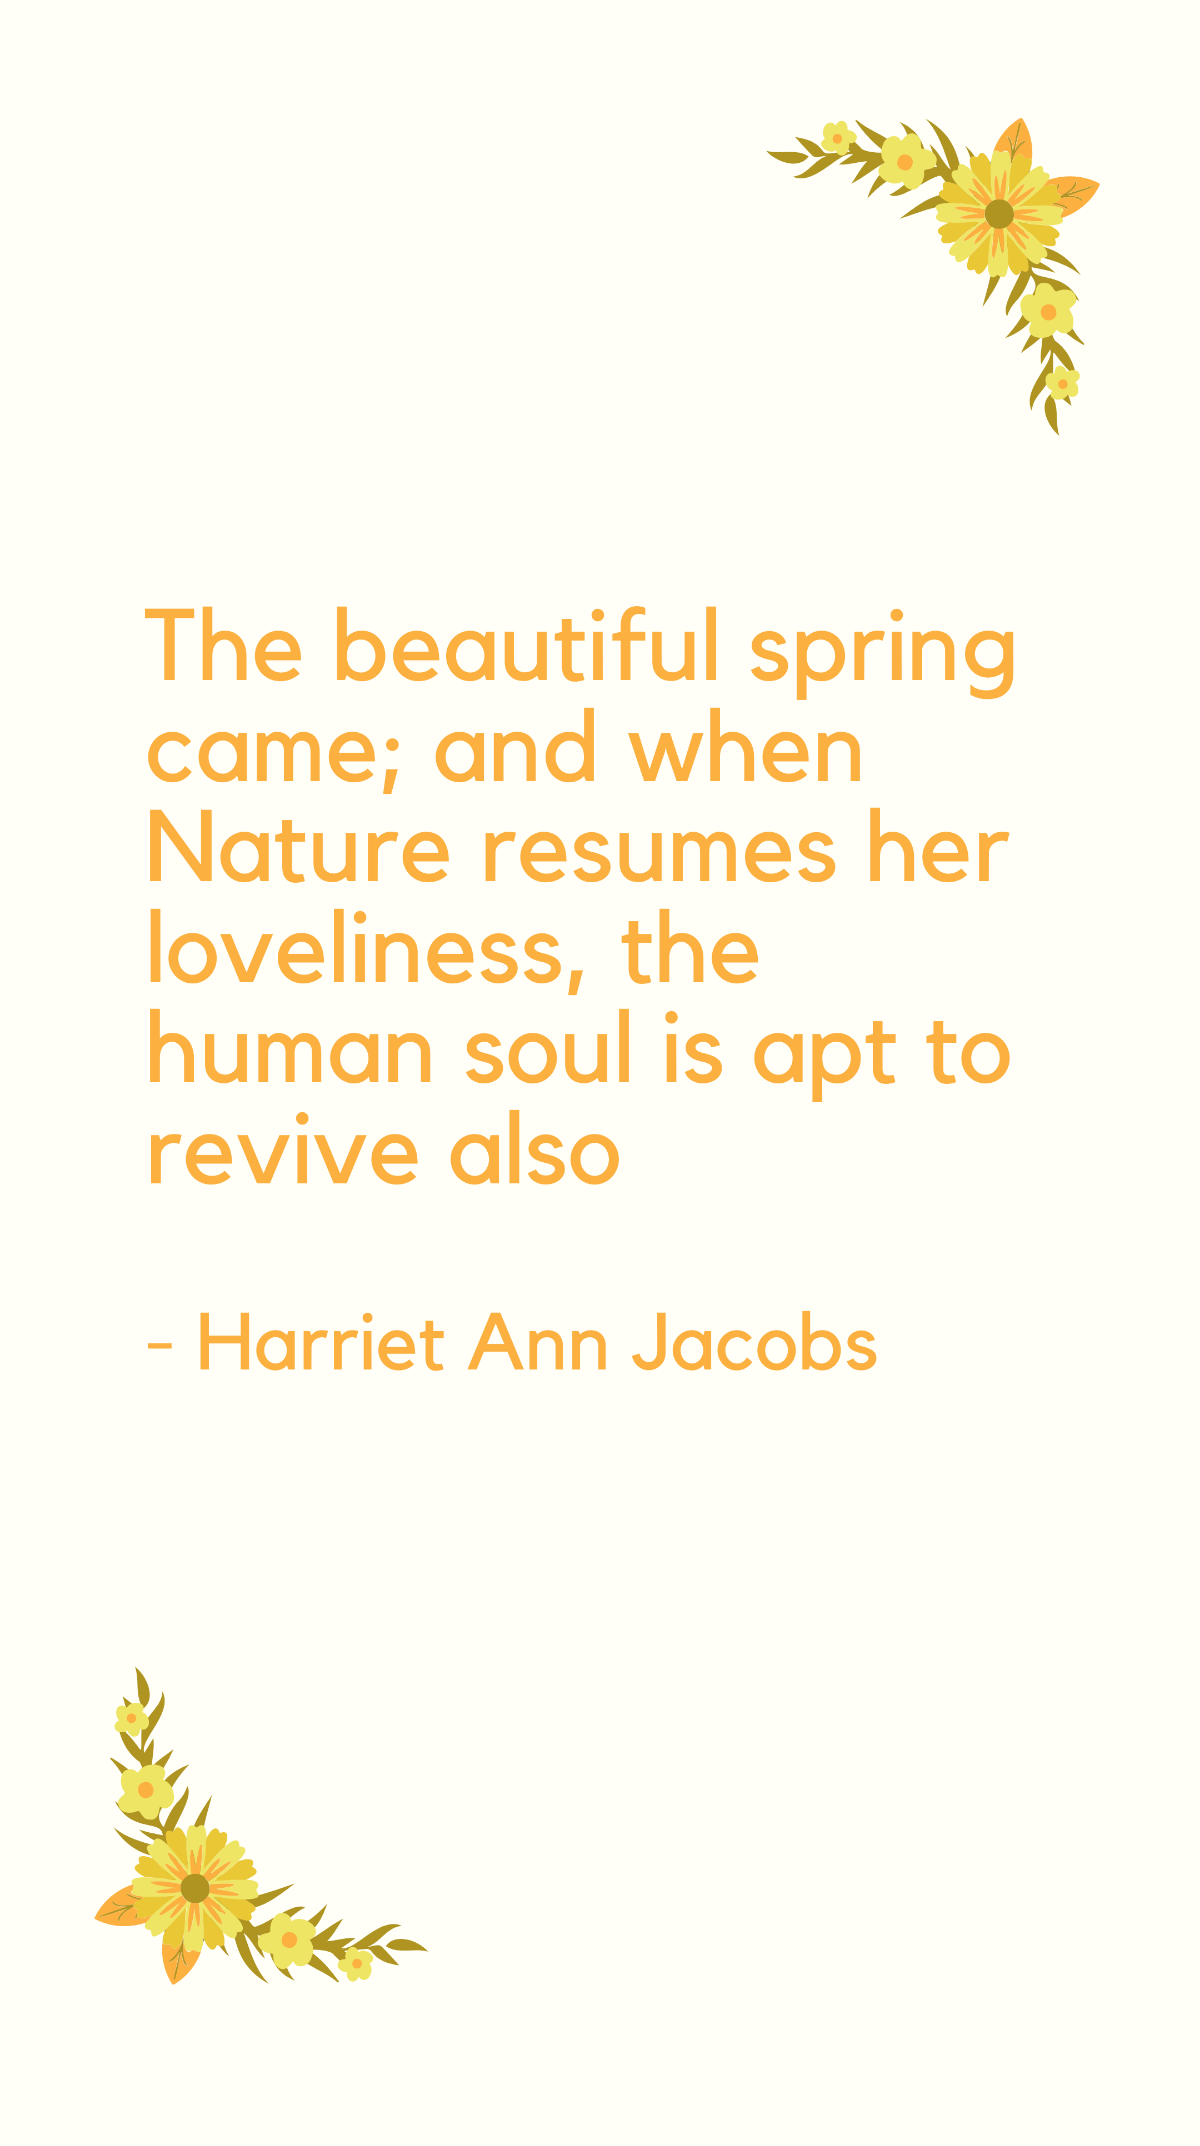 Free Harriet Ann Jacobs - The beautiful spring came; and when Nature resumes her loveliness, the human soul is apt to revive also Template